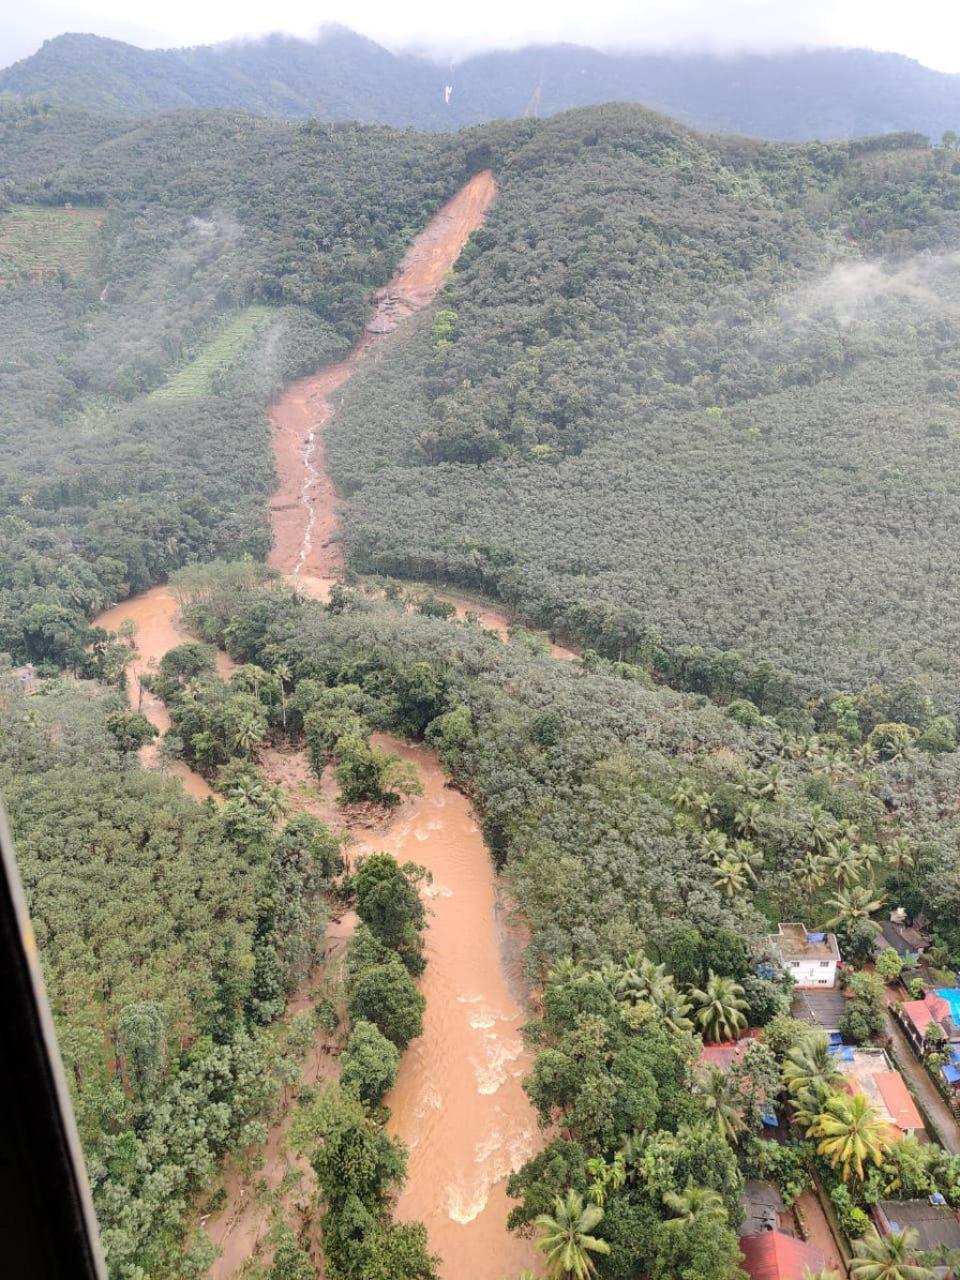 This photograph provided by the Indian Navy and taken from a naval helicopter shows the scene after a landslide triggered by heavy rains in the Western Ghats mountains at Koottickal in Kottayam district of Kerala (AP)